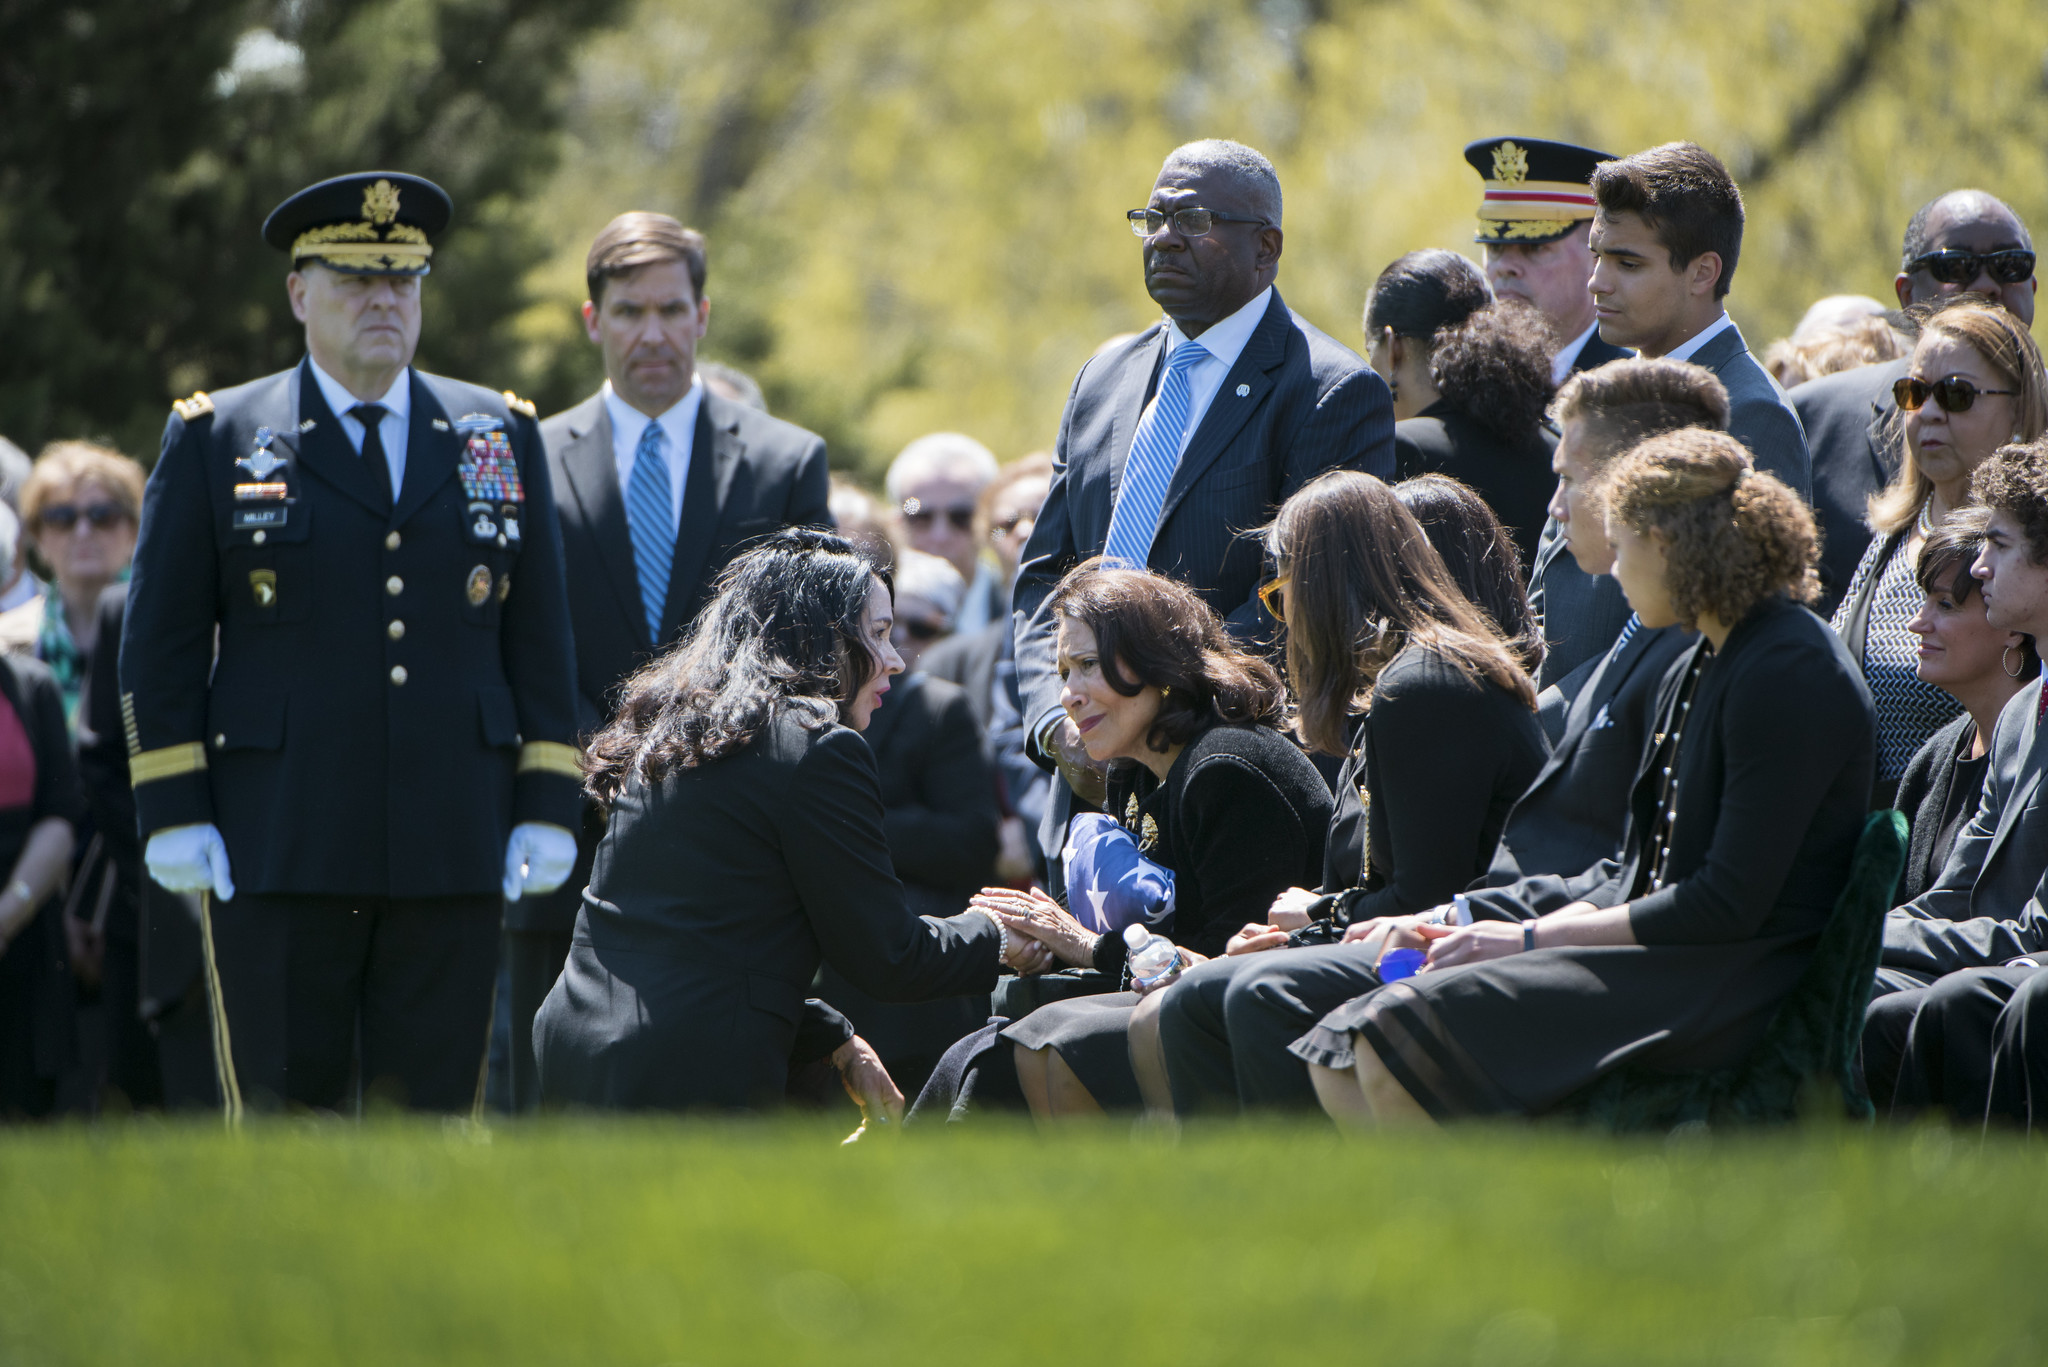 Family members and guests at full honors funeral of former Secretary of the Army Togo D. West, Jr. in Section 34 of Arlington National Cemetery